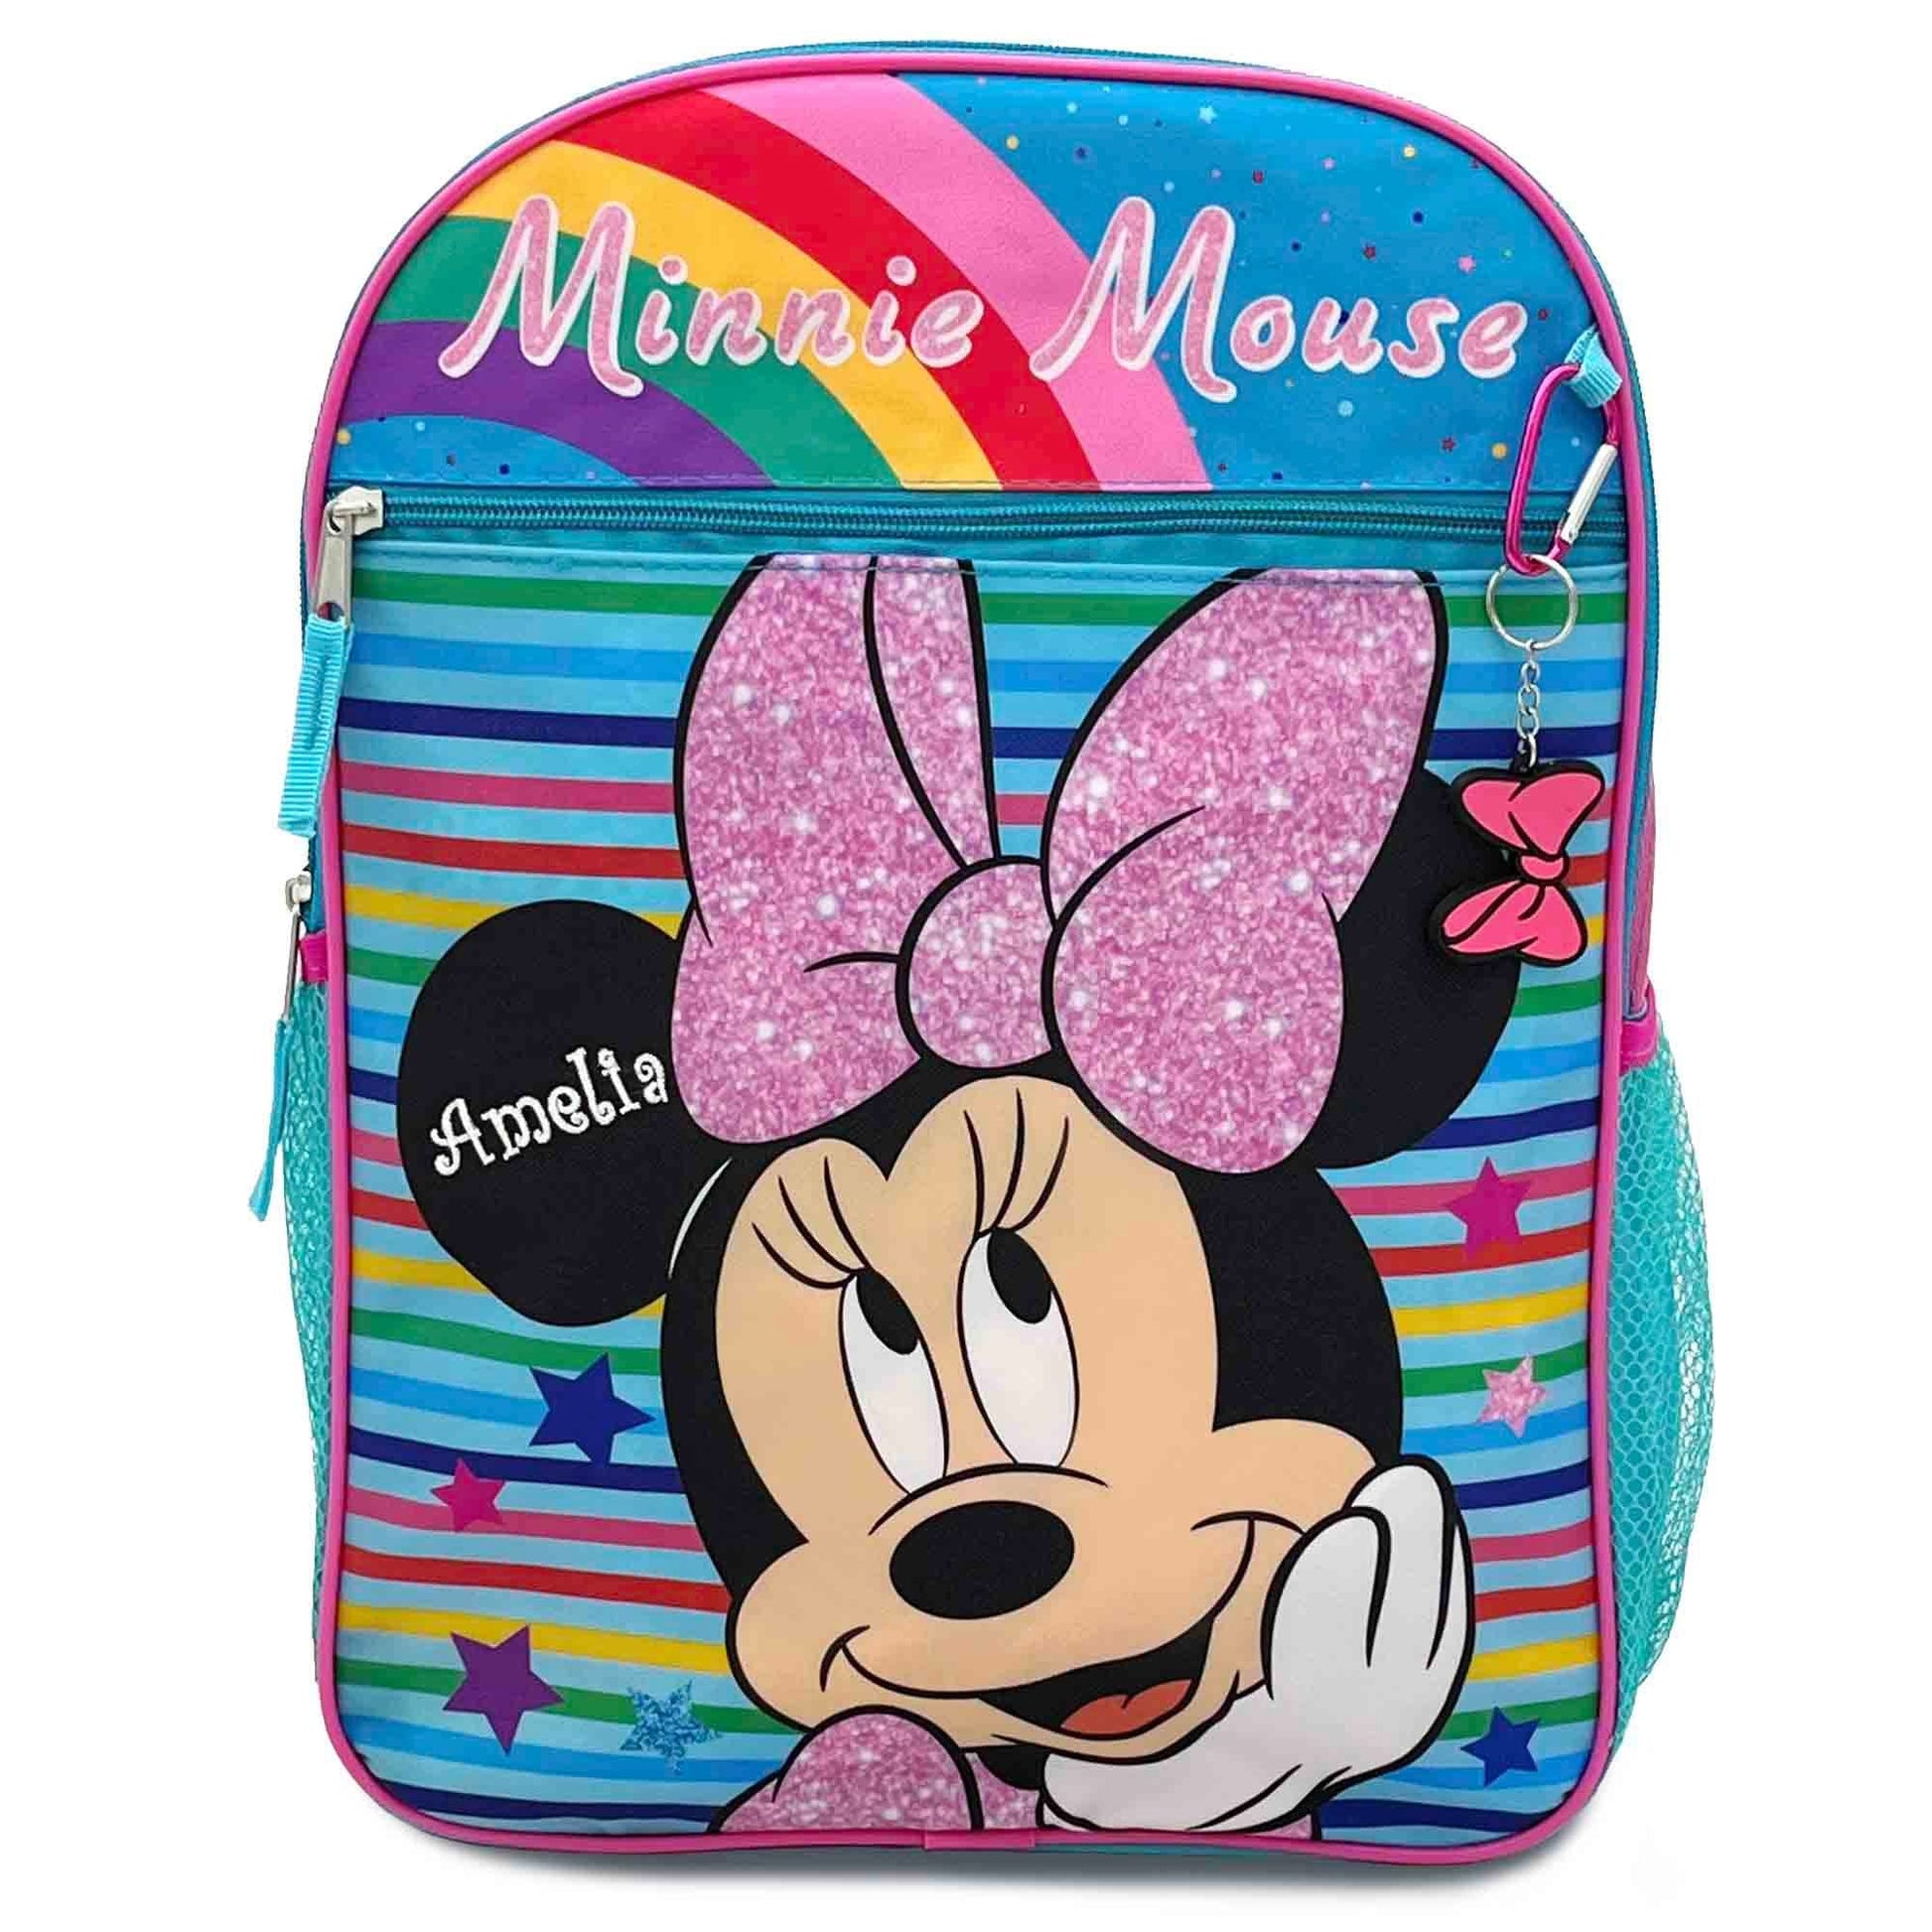 DIBSIES Personalized Licensed Character Backpack - 16 Inch